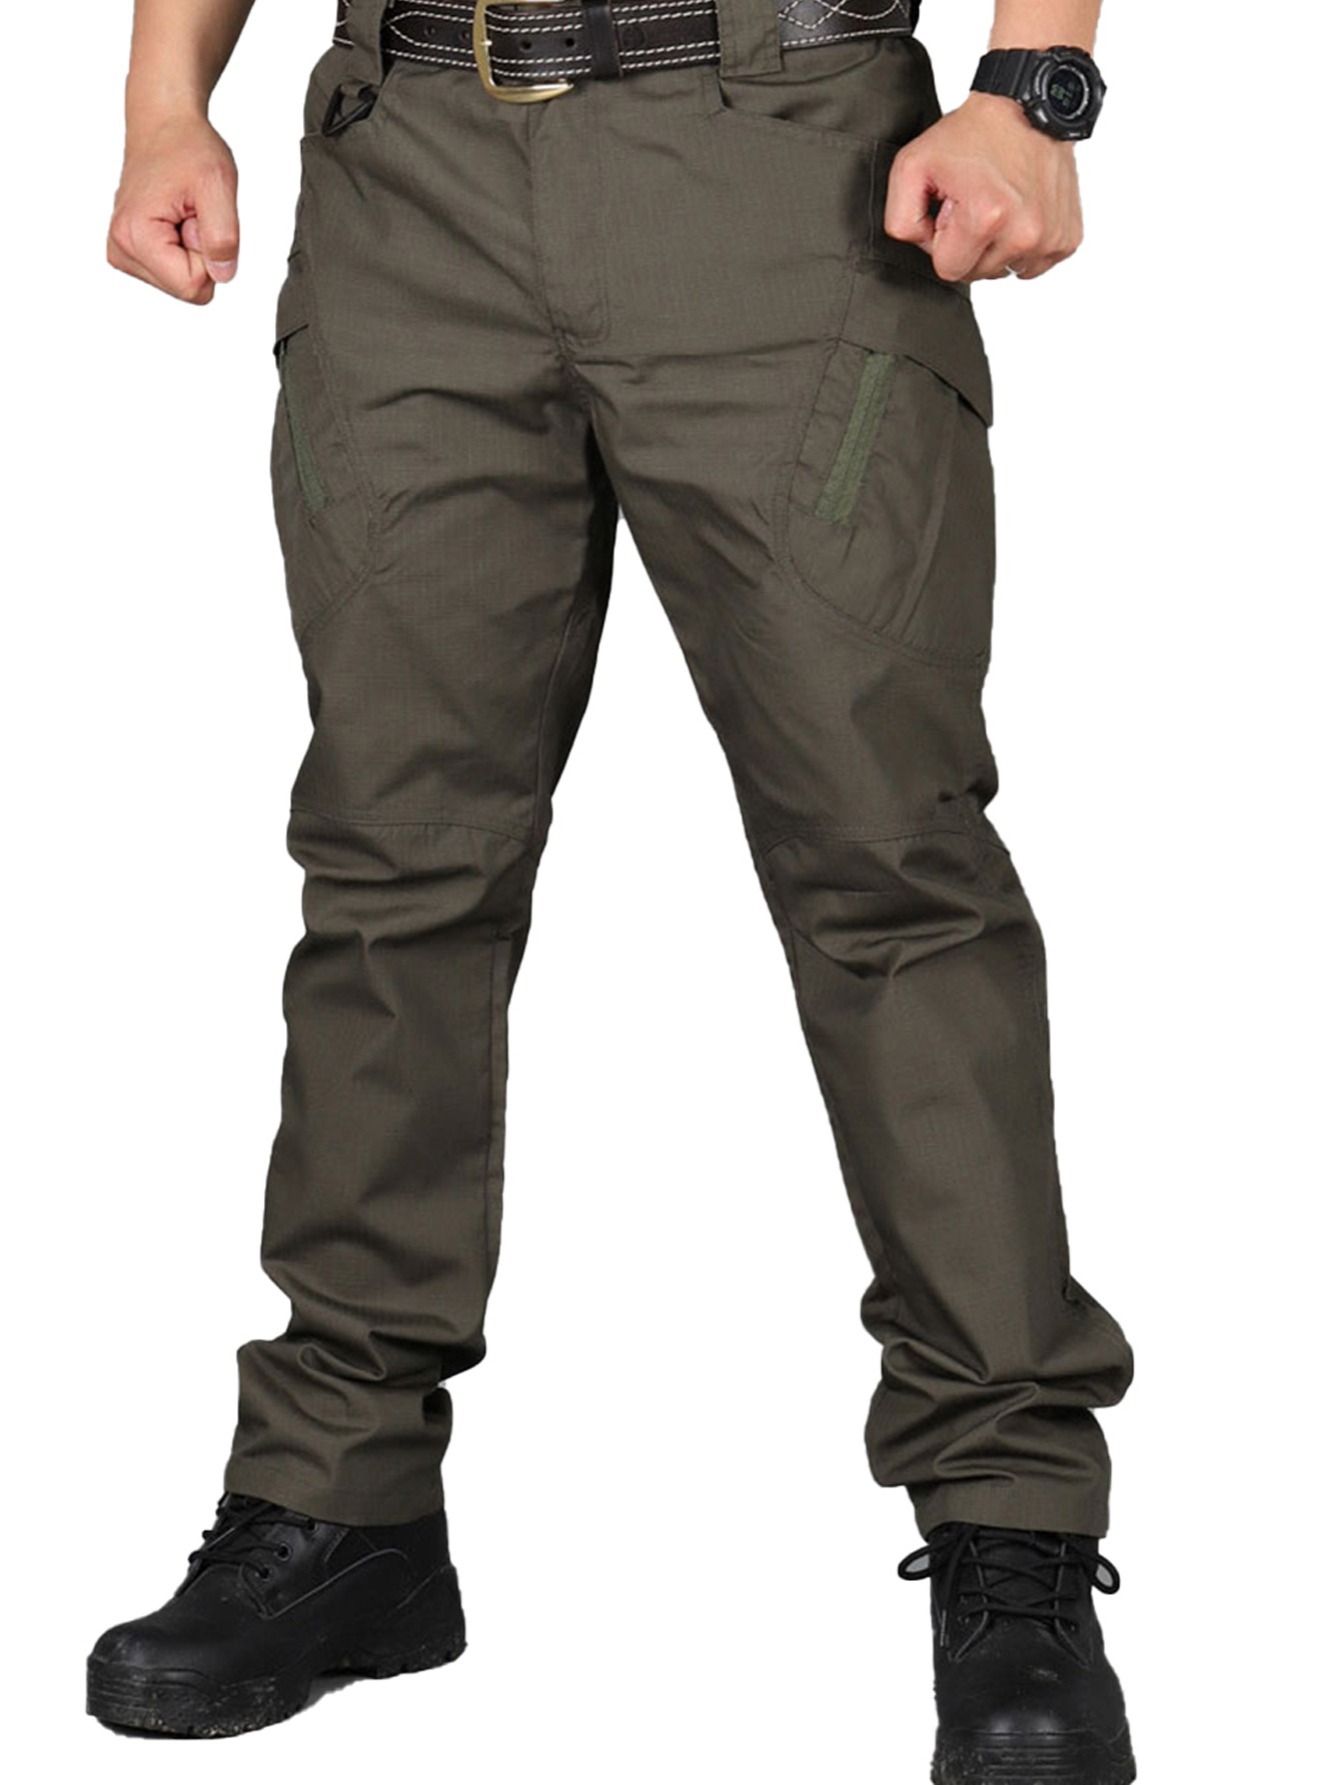  Brnmxoke Ripstop Pants for Men,Casual Hiking Outdoor